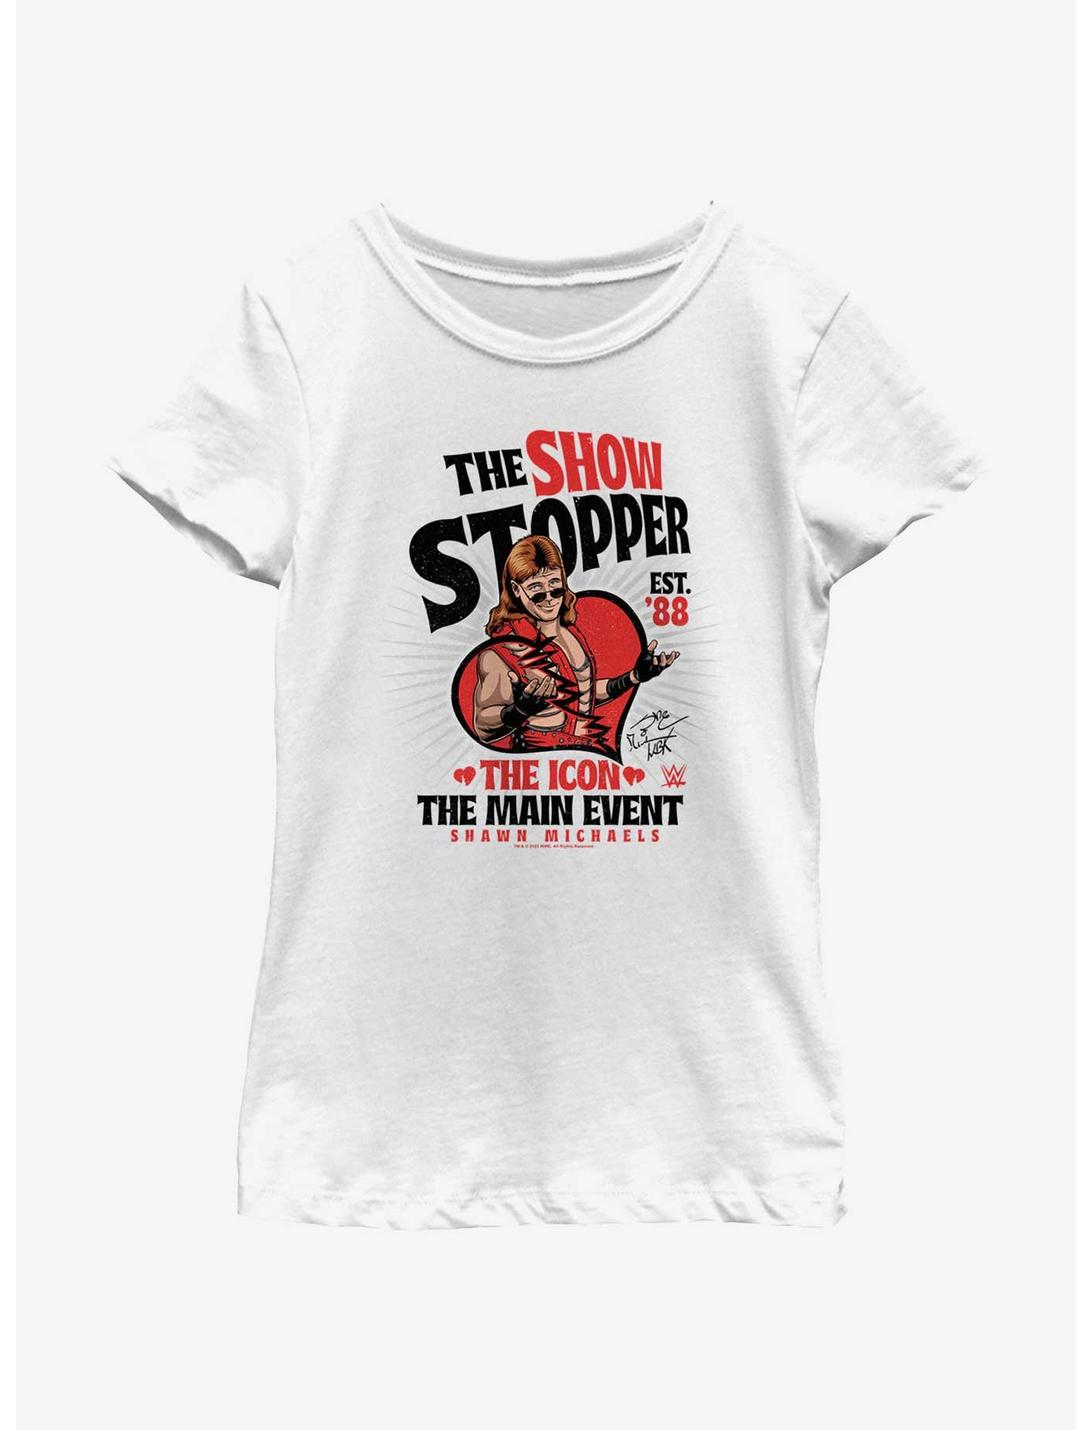 WWE Shawn Michaels The Show Stopper Youth Girls T-Shirt, WHITE, hi-res